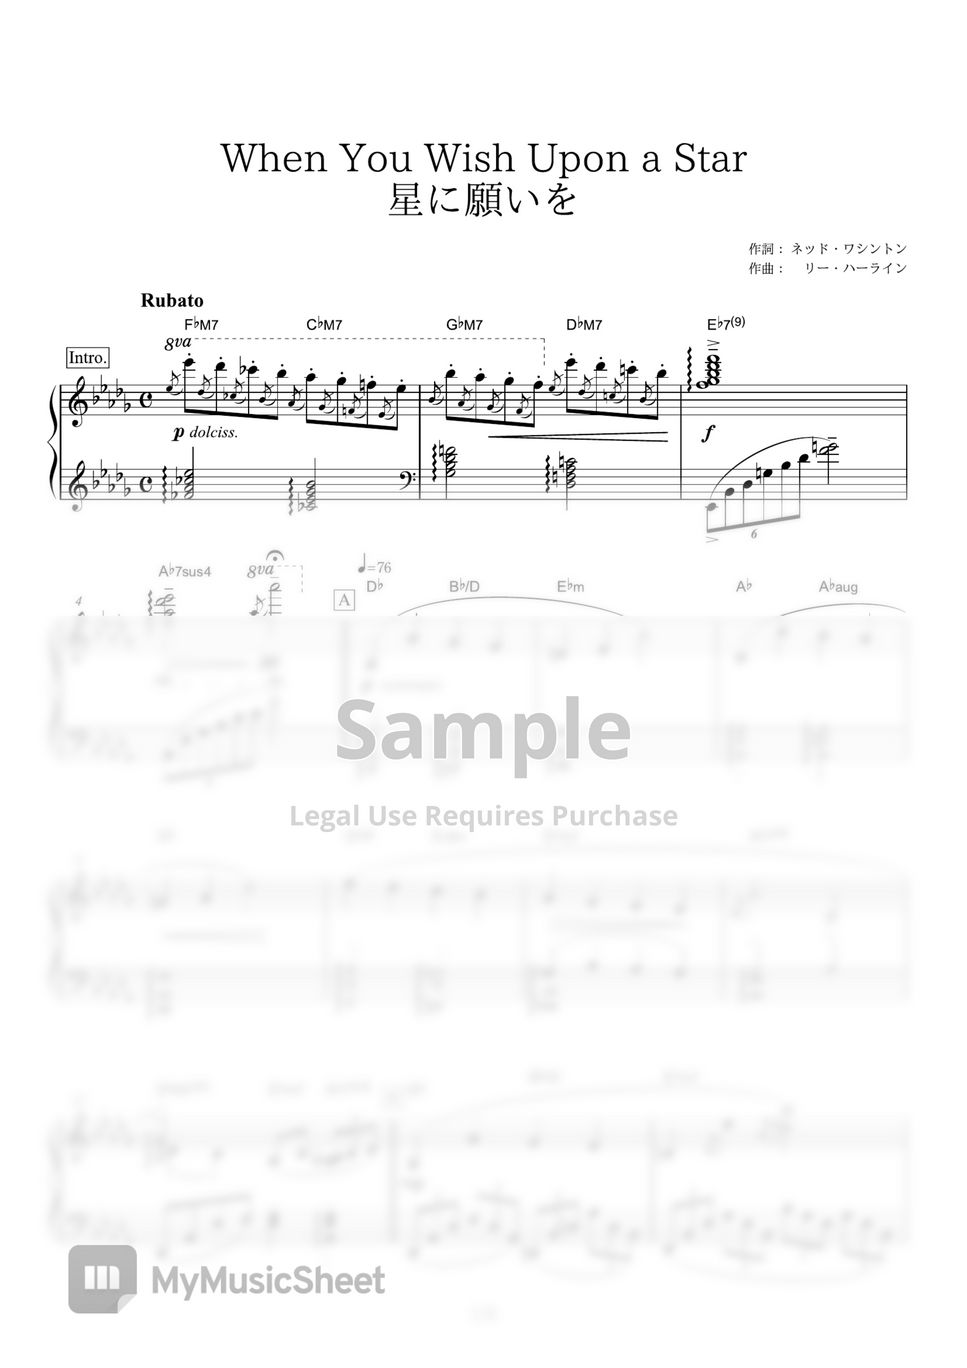 Pinocchio - When You Wish upon a Star by PianoBooks